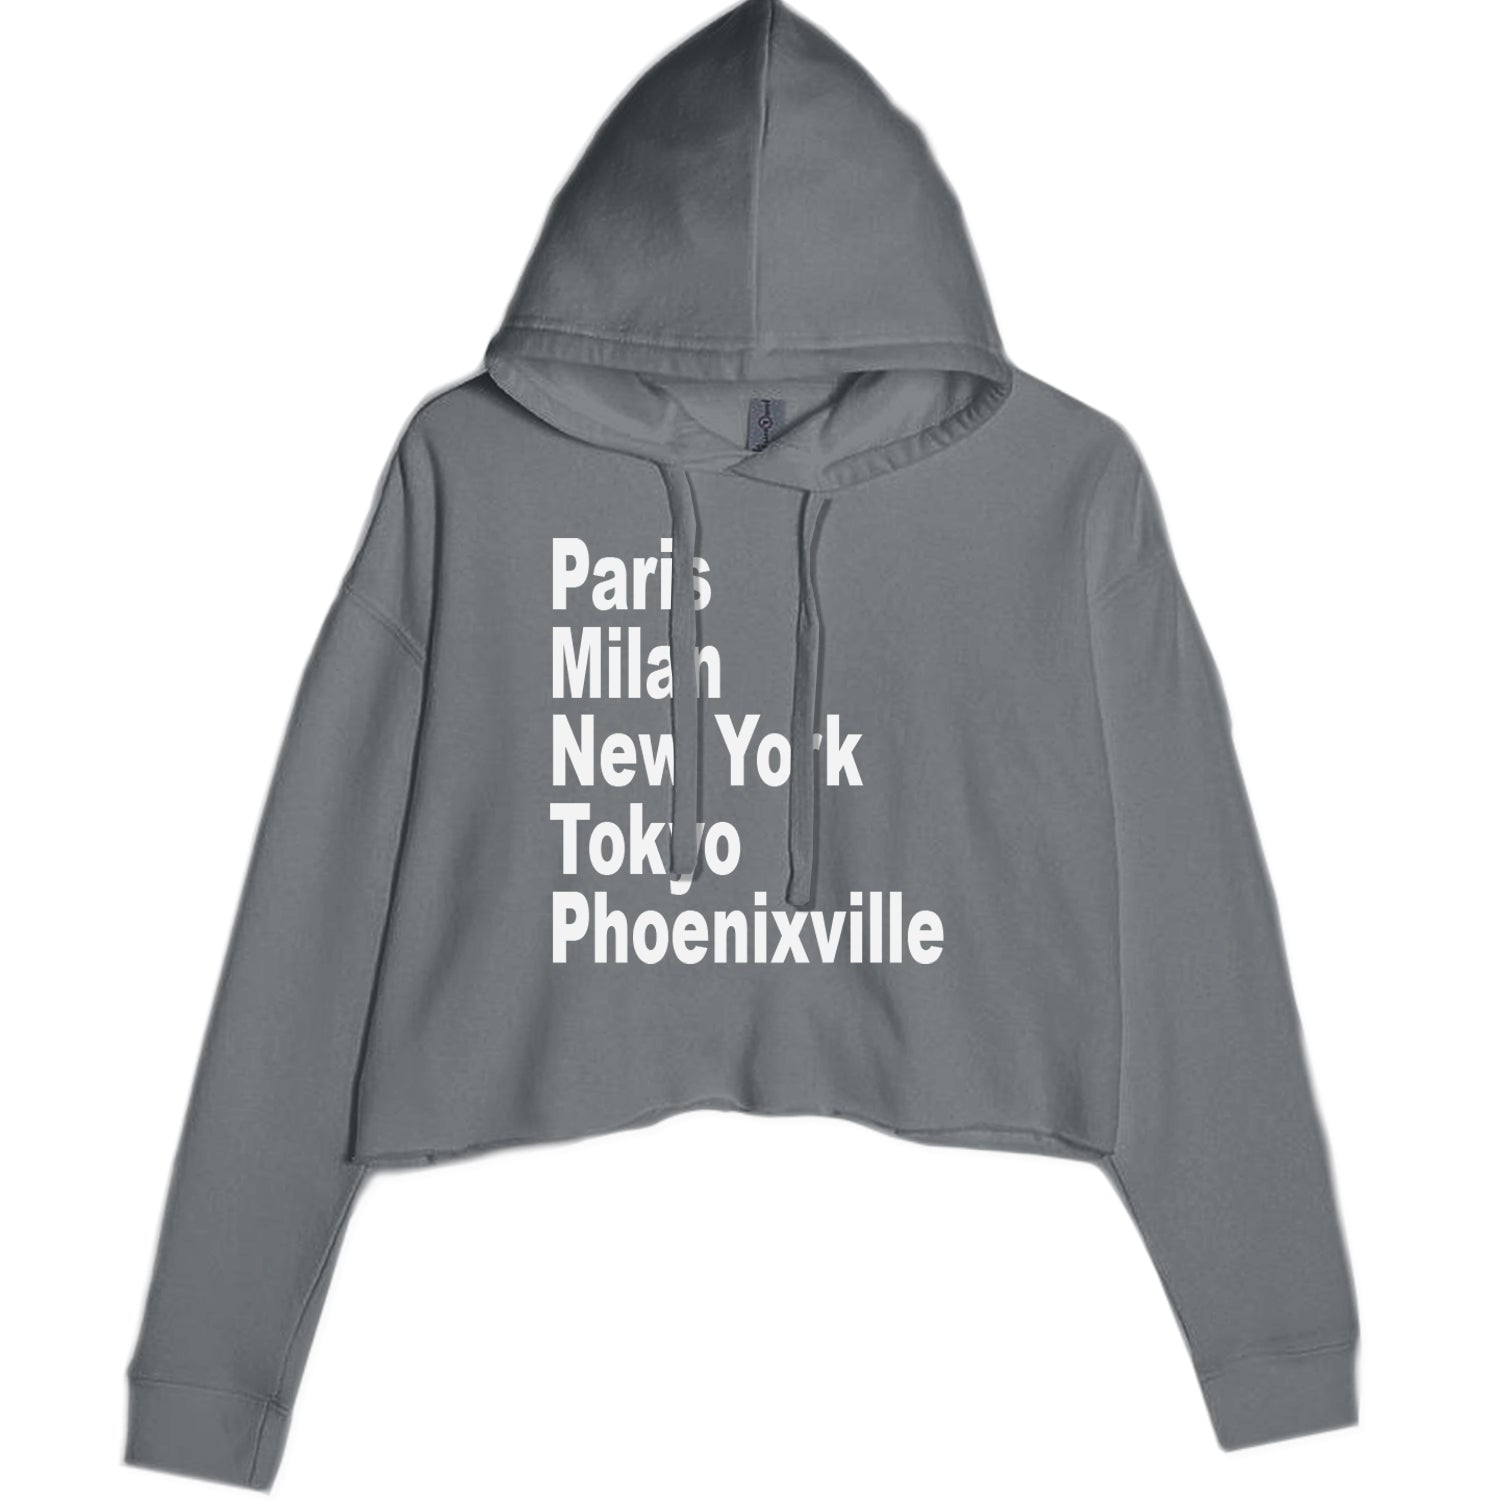 The Great Borough Of Phoenixville Cropped Hoodie Sweatshirt